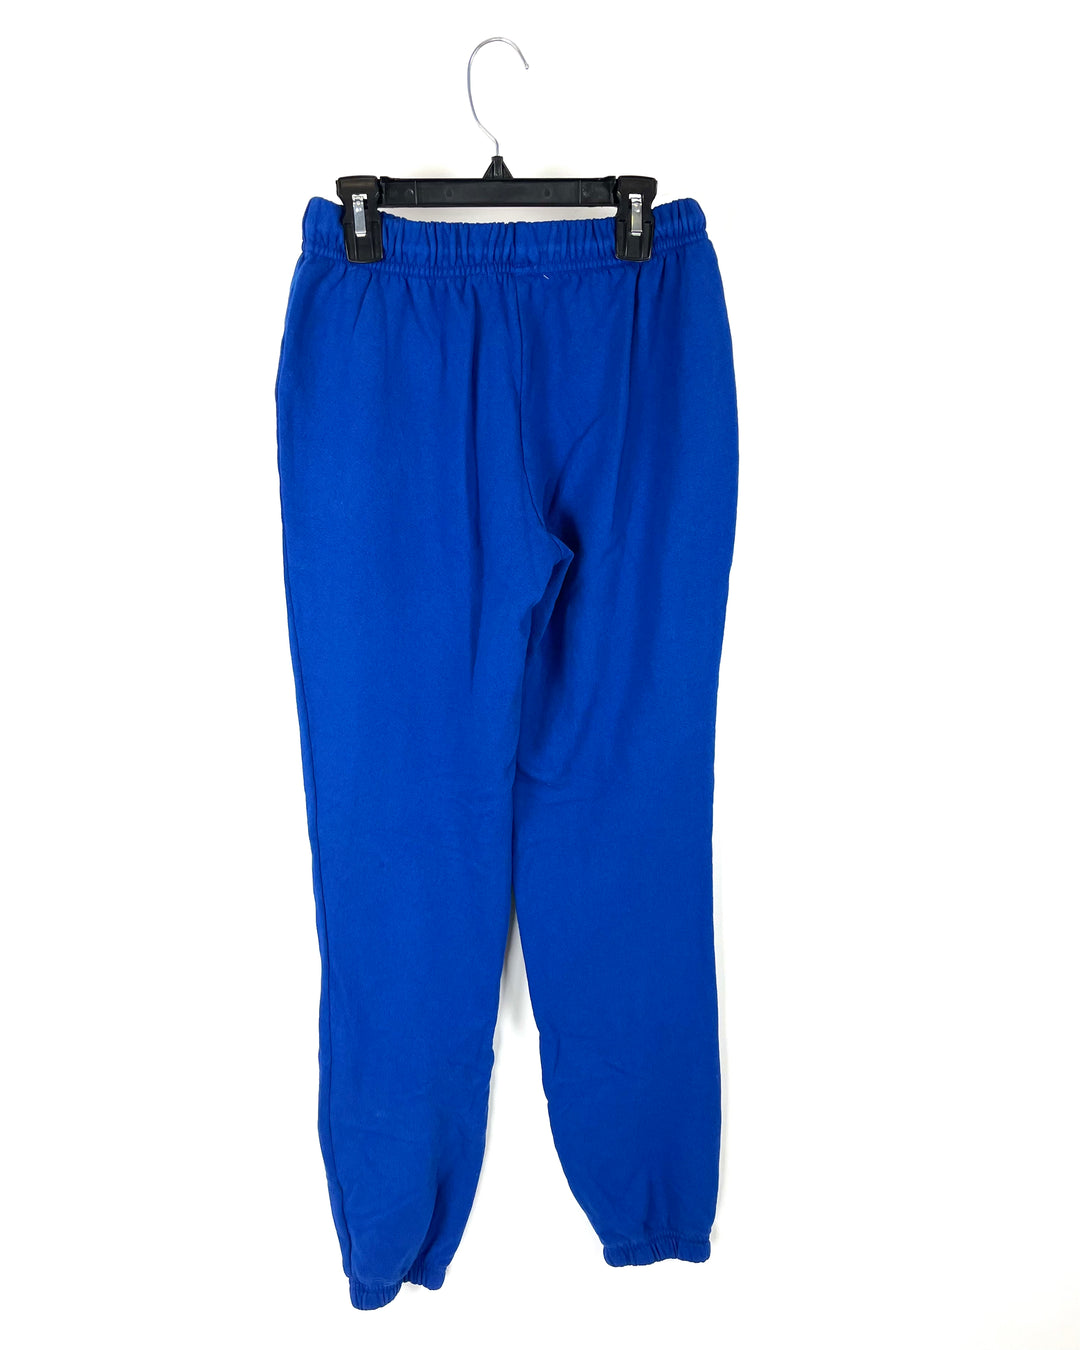 Dark Blue Sweatpants - Extra Small and Small